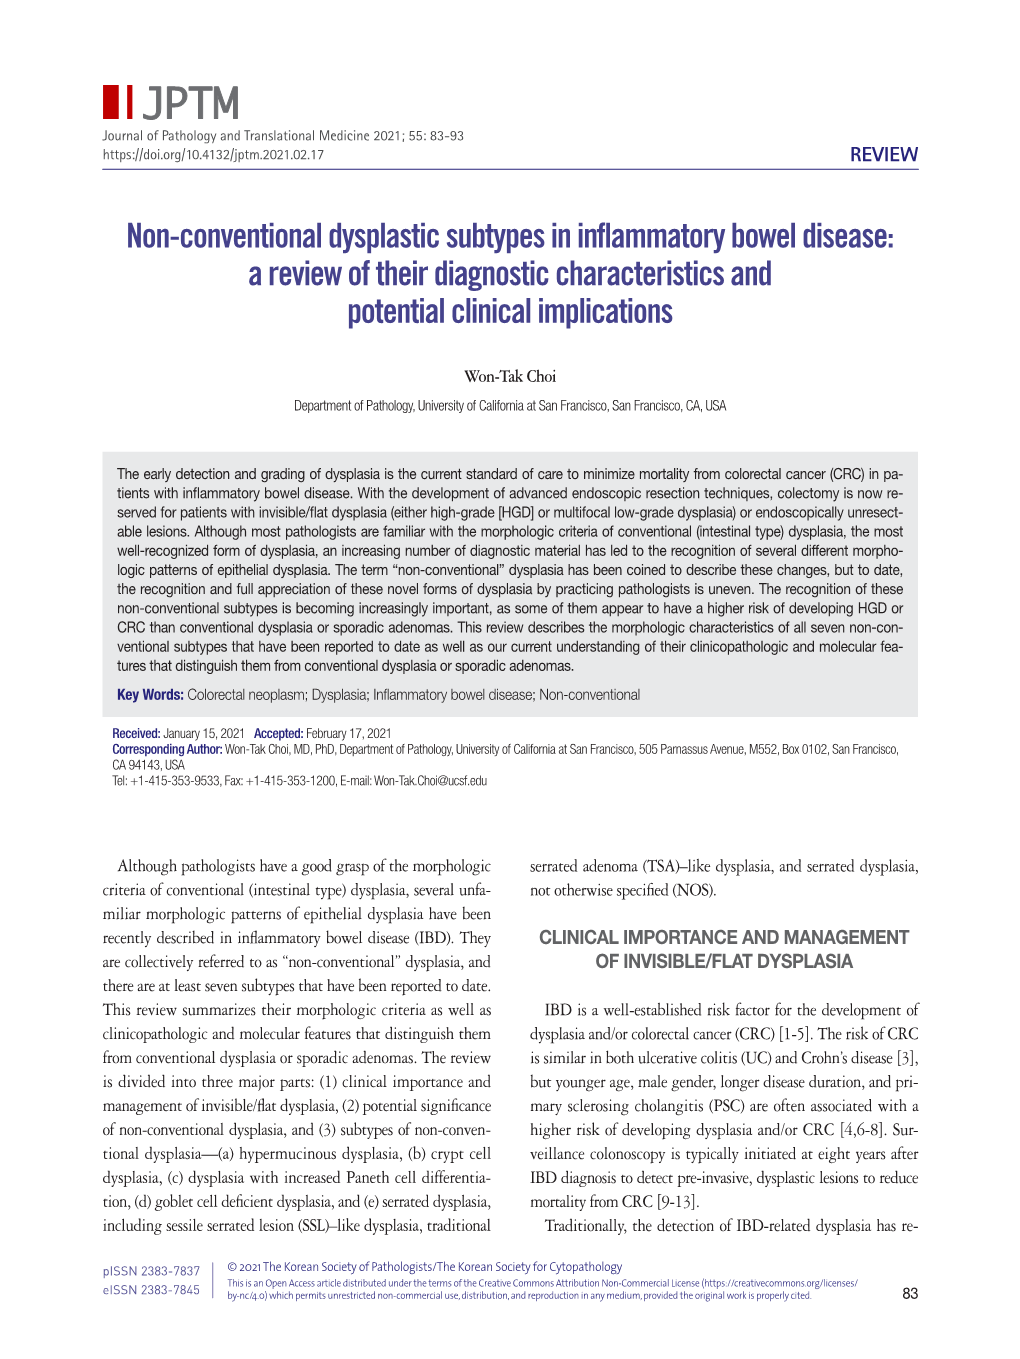 Non-Conventional Dysplastic Subtypes in Inflammatory Bowel Disease: a Review of Their Diagnostic Characteristics and Potential Clinical Implications